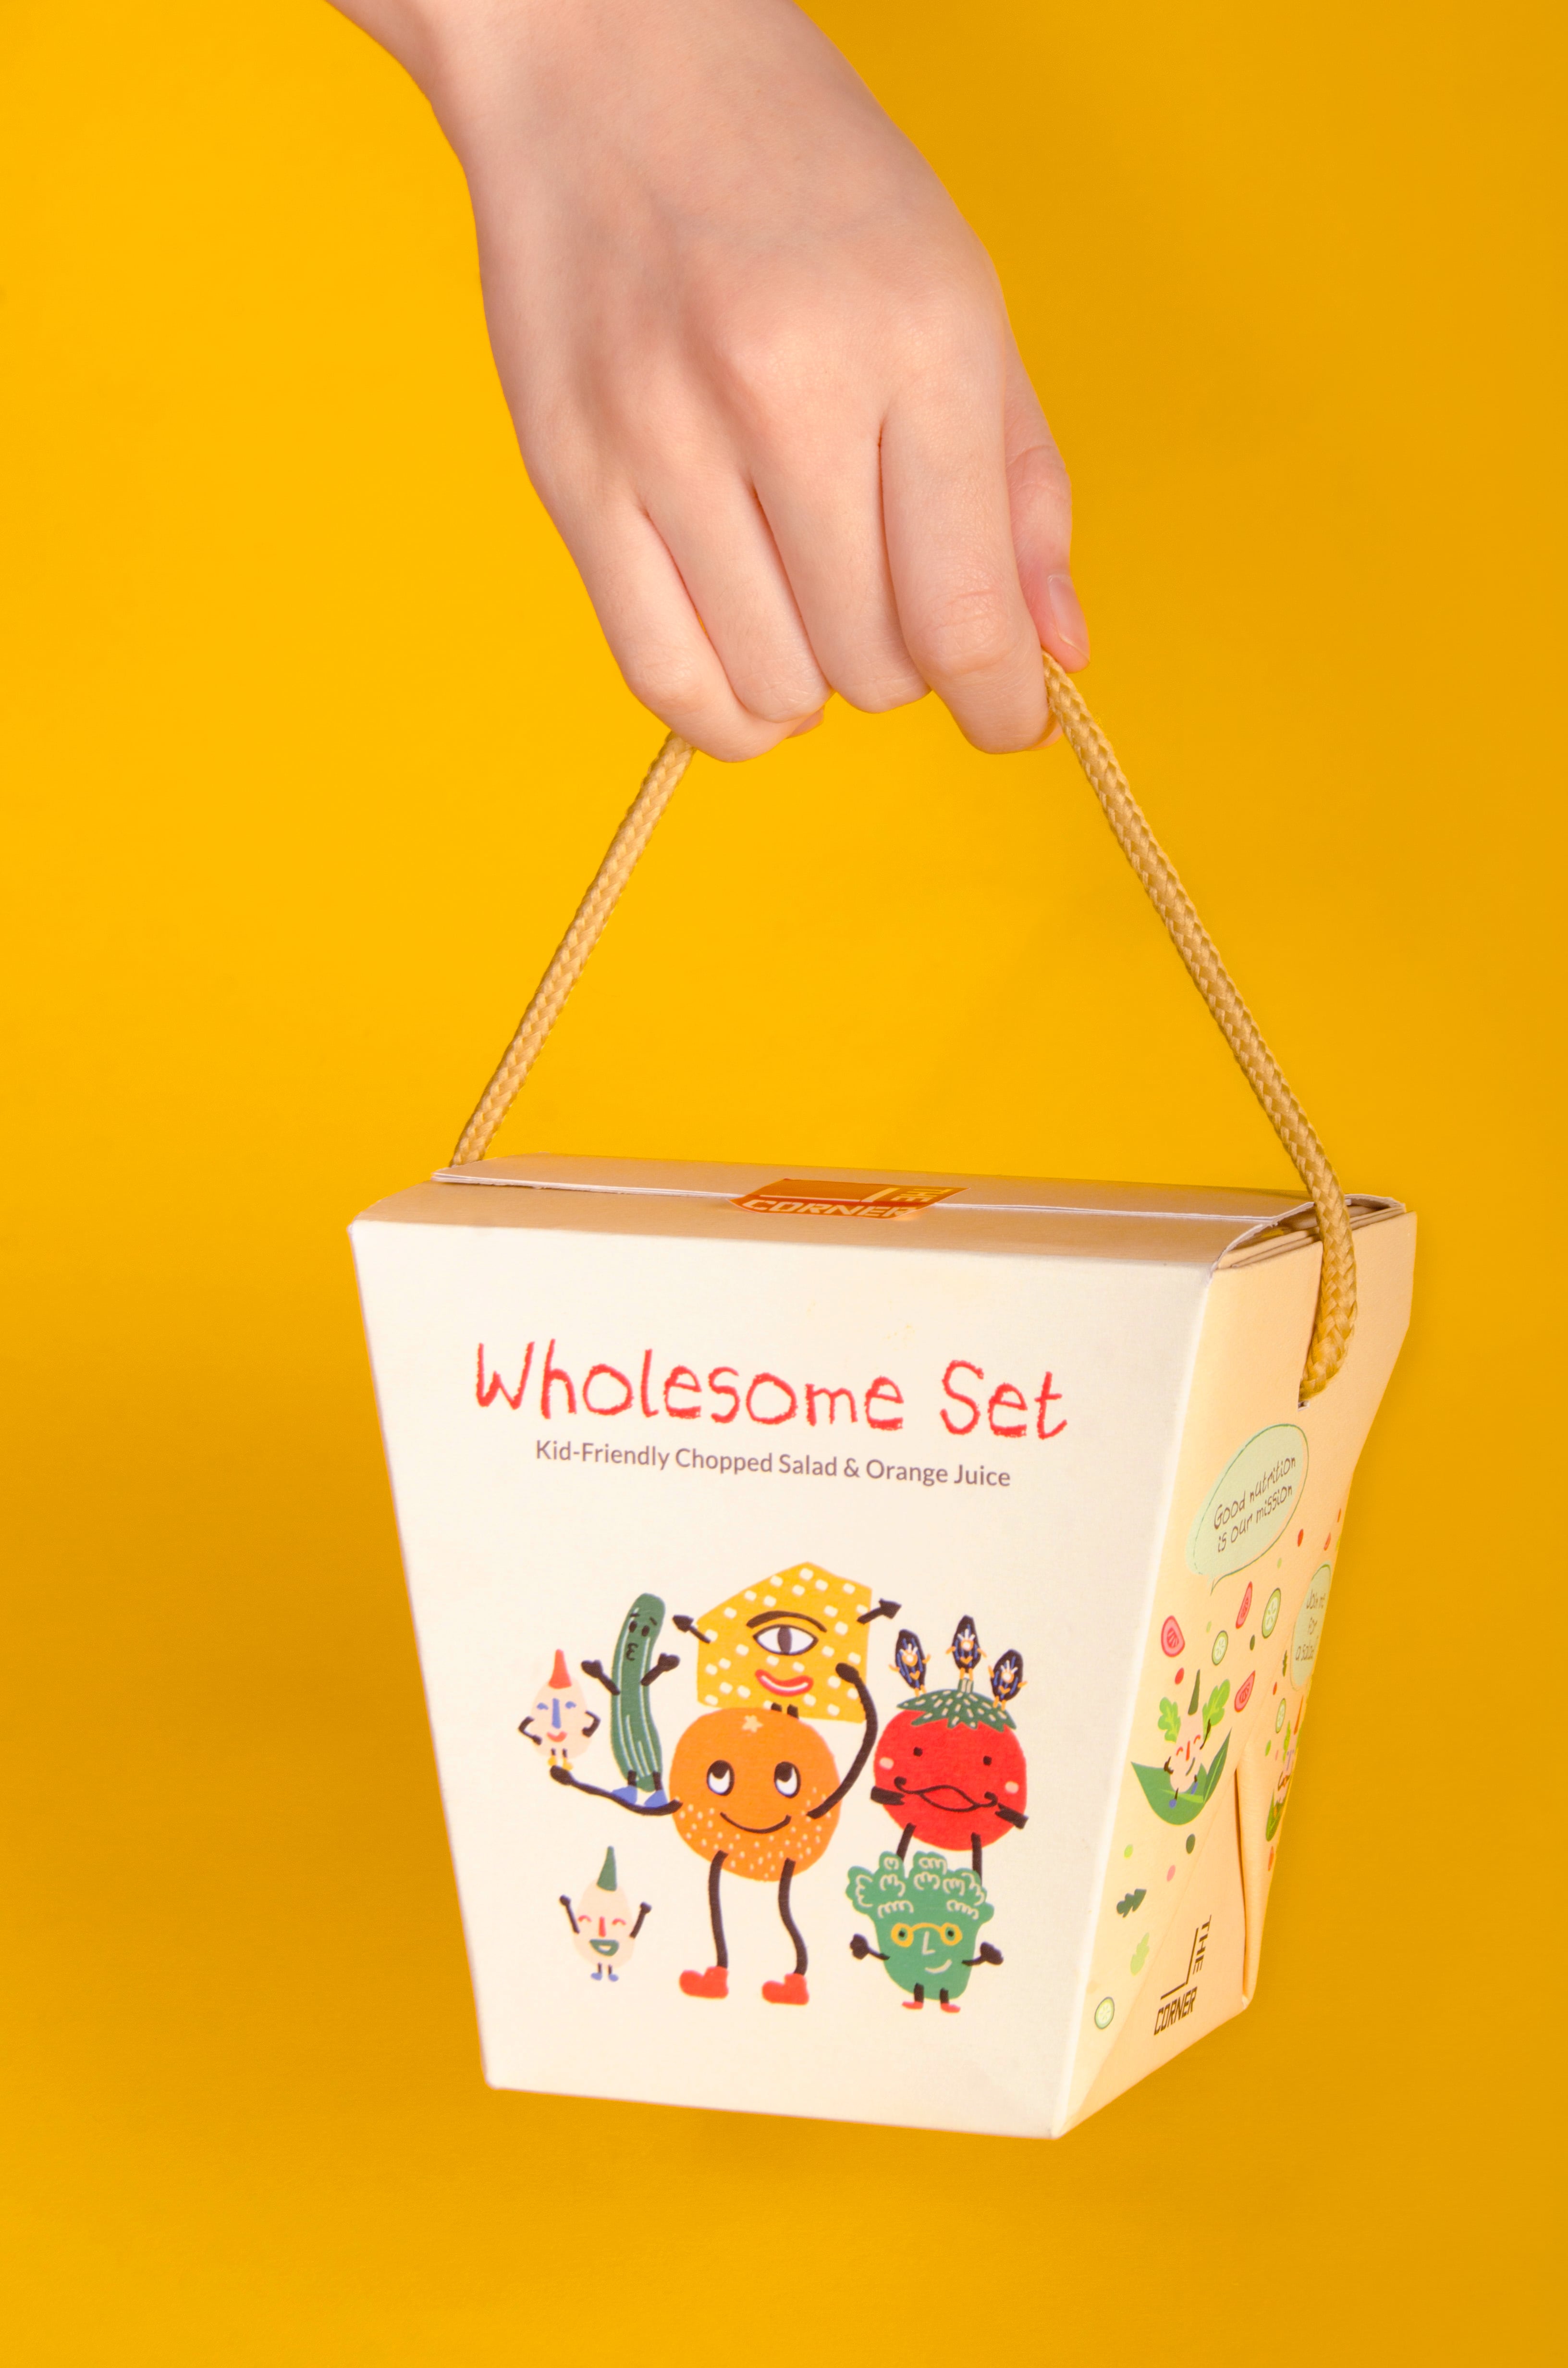 Student packaging Design Concept for Wholesome Set by Tham Chu Yin